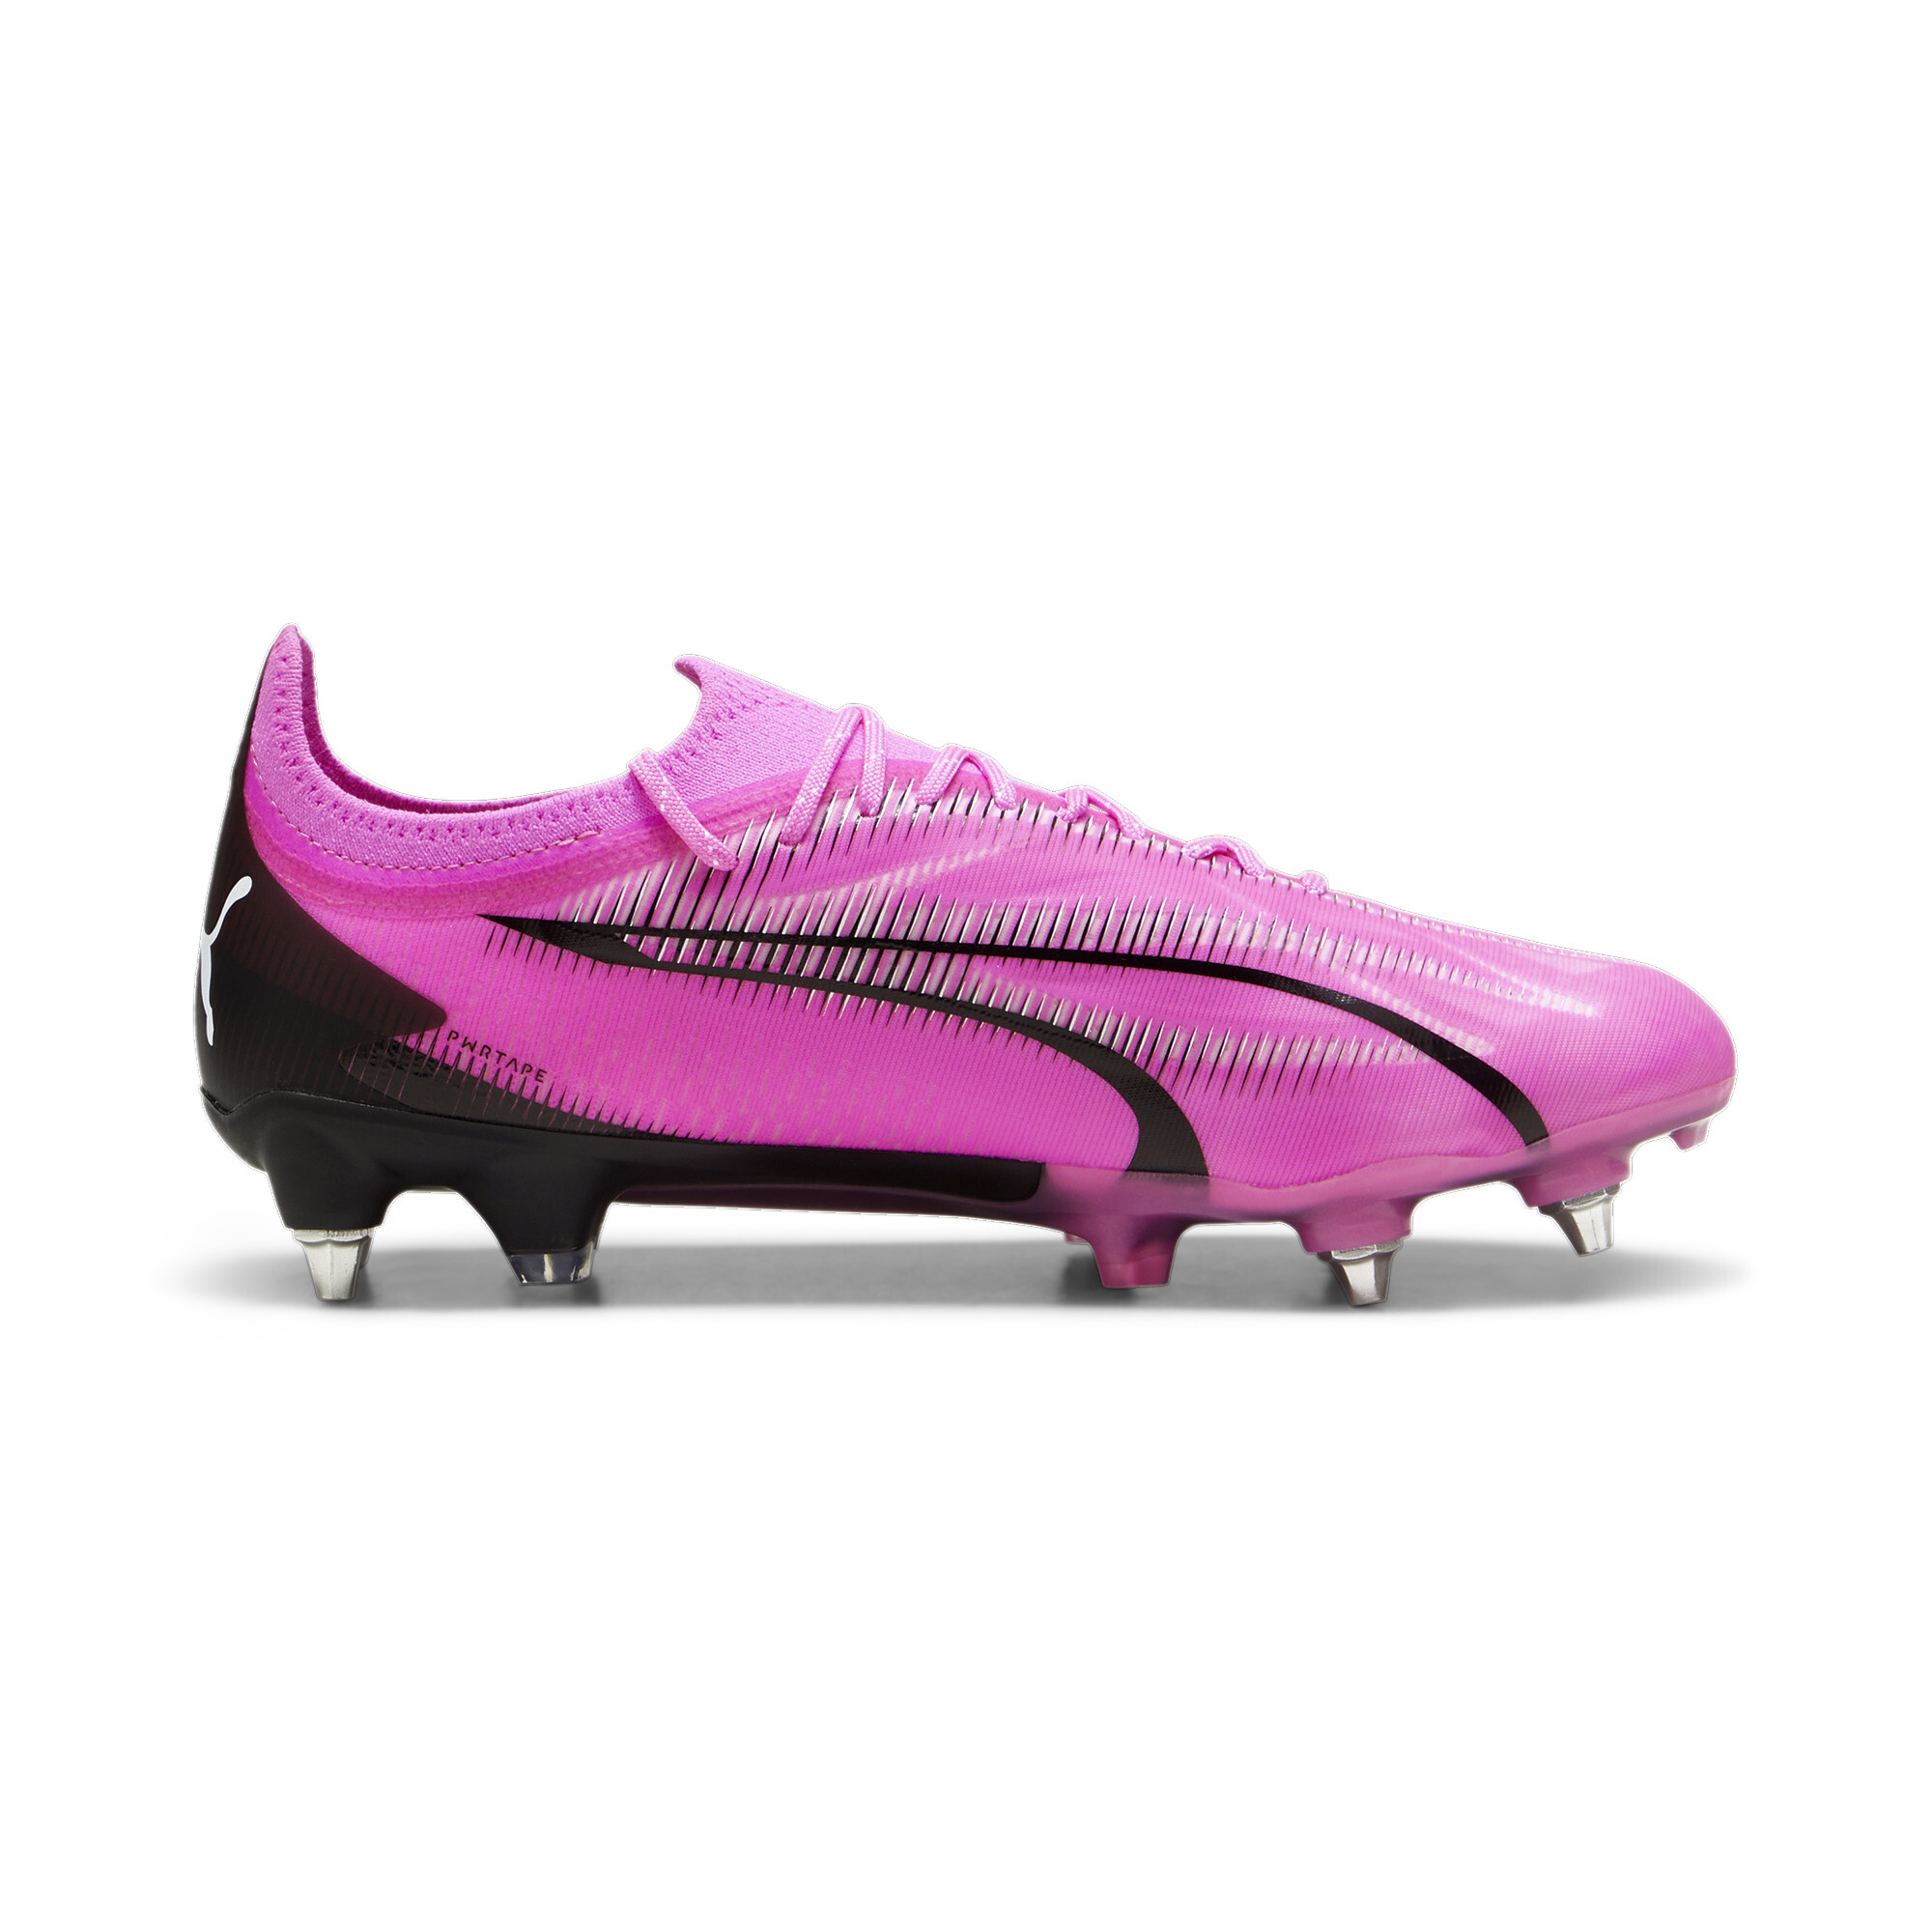 Puma ULTRA ULTIMATE Mx SG Football Boots, Pink, Size 45, Shoes